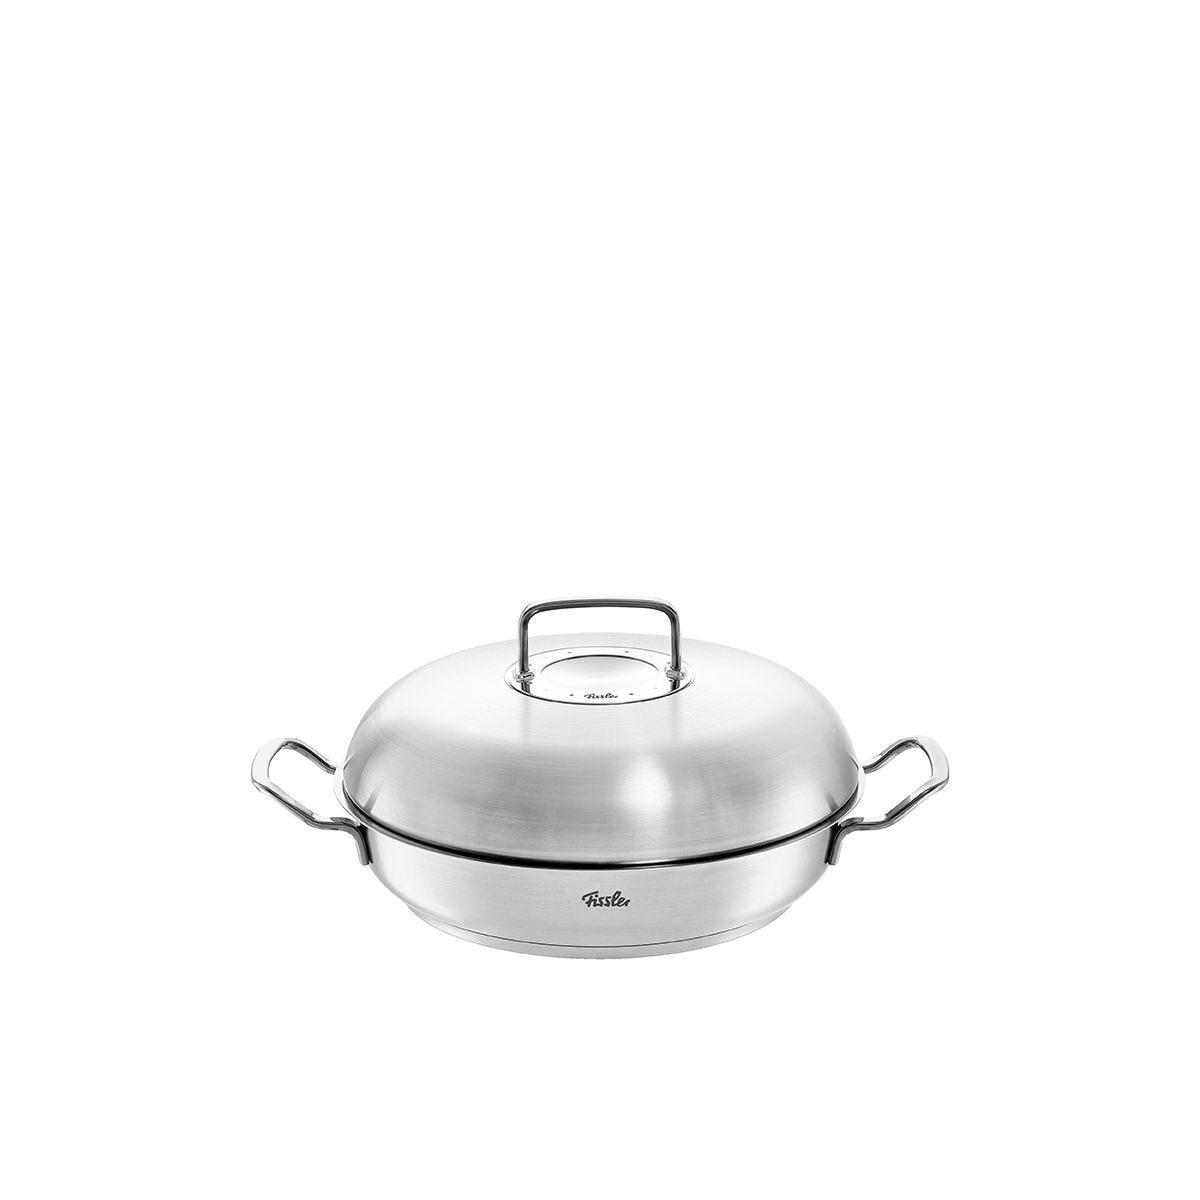 Original-Profi Collection® Serving Pan with Novogrill® and High Dome Lid